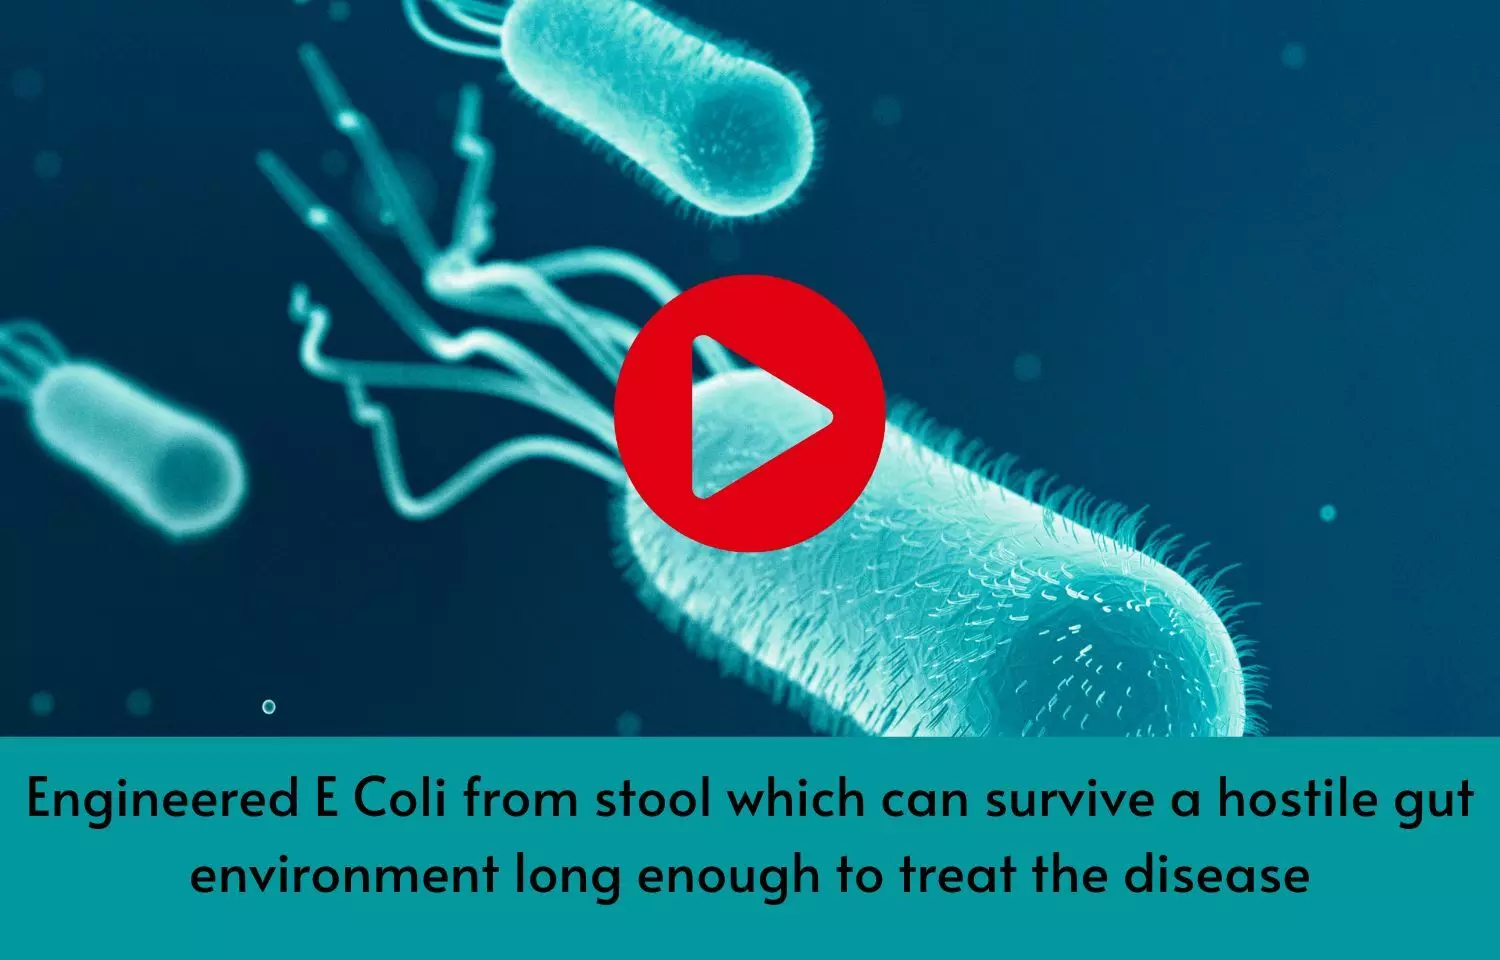 Engineered E Coli from stool which can survive a hostile gut environment long enough to treat the disease